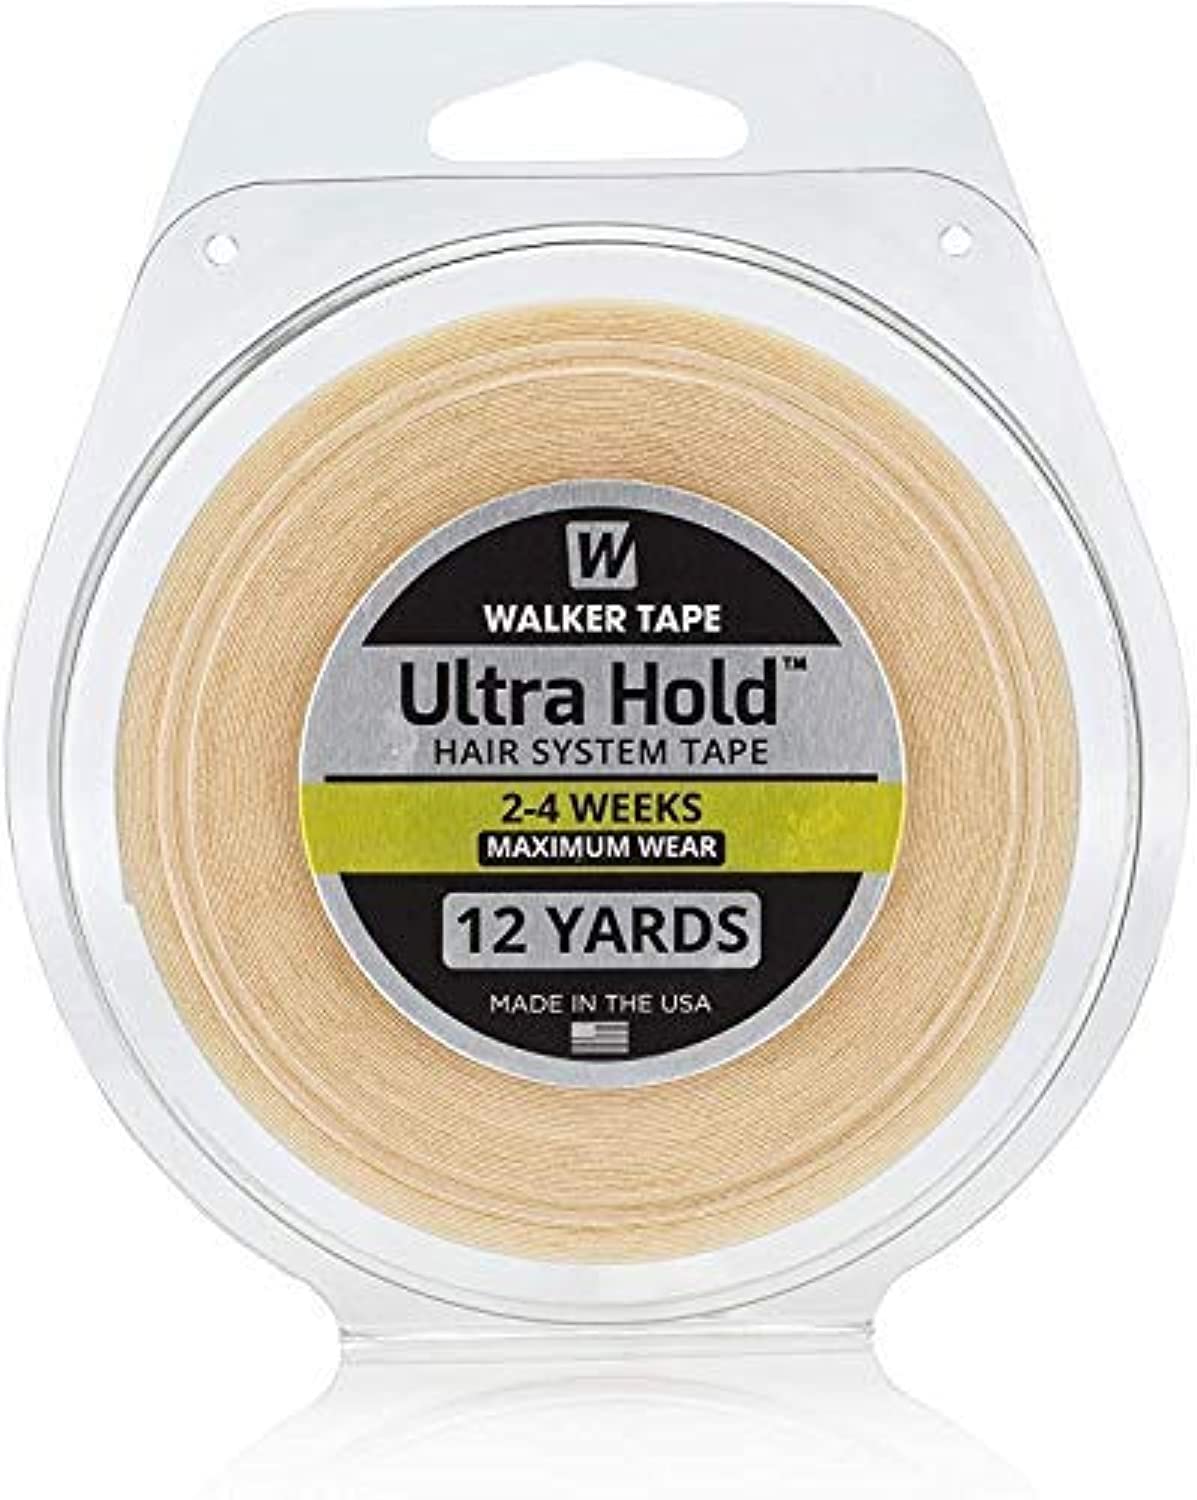 Ultra Hold 3/4 Inch x 12 Yards Authentic Walker Tape